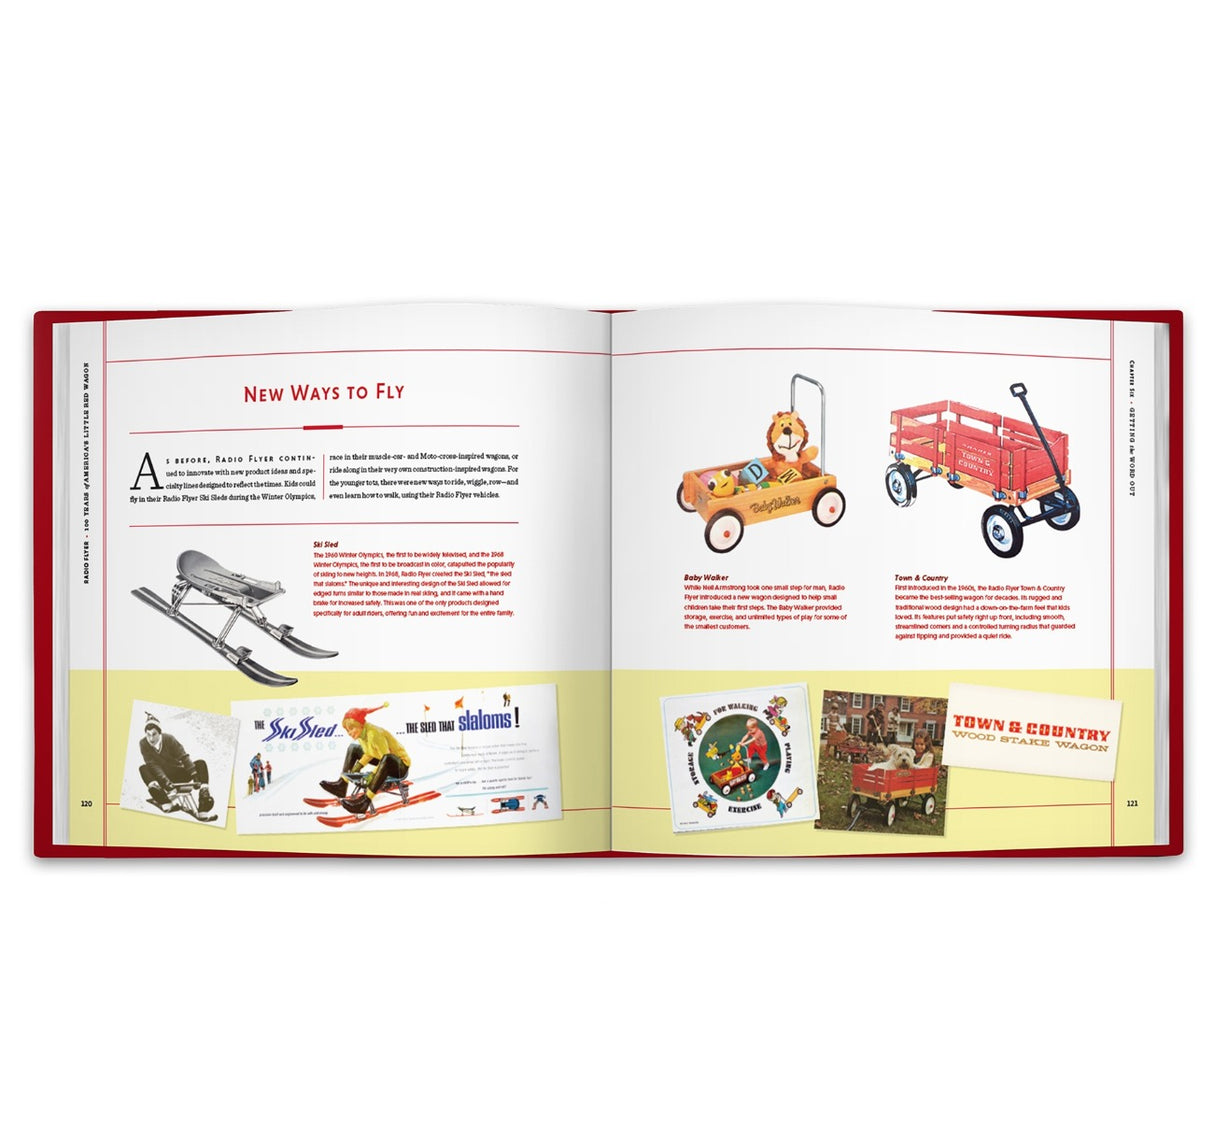 Radio Flyer: 100 Years of America's Little Red Wagon